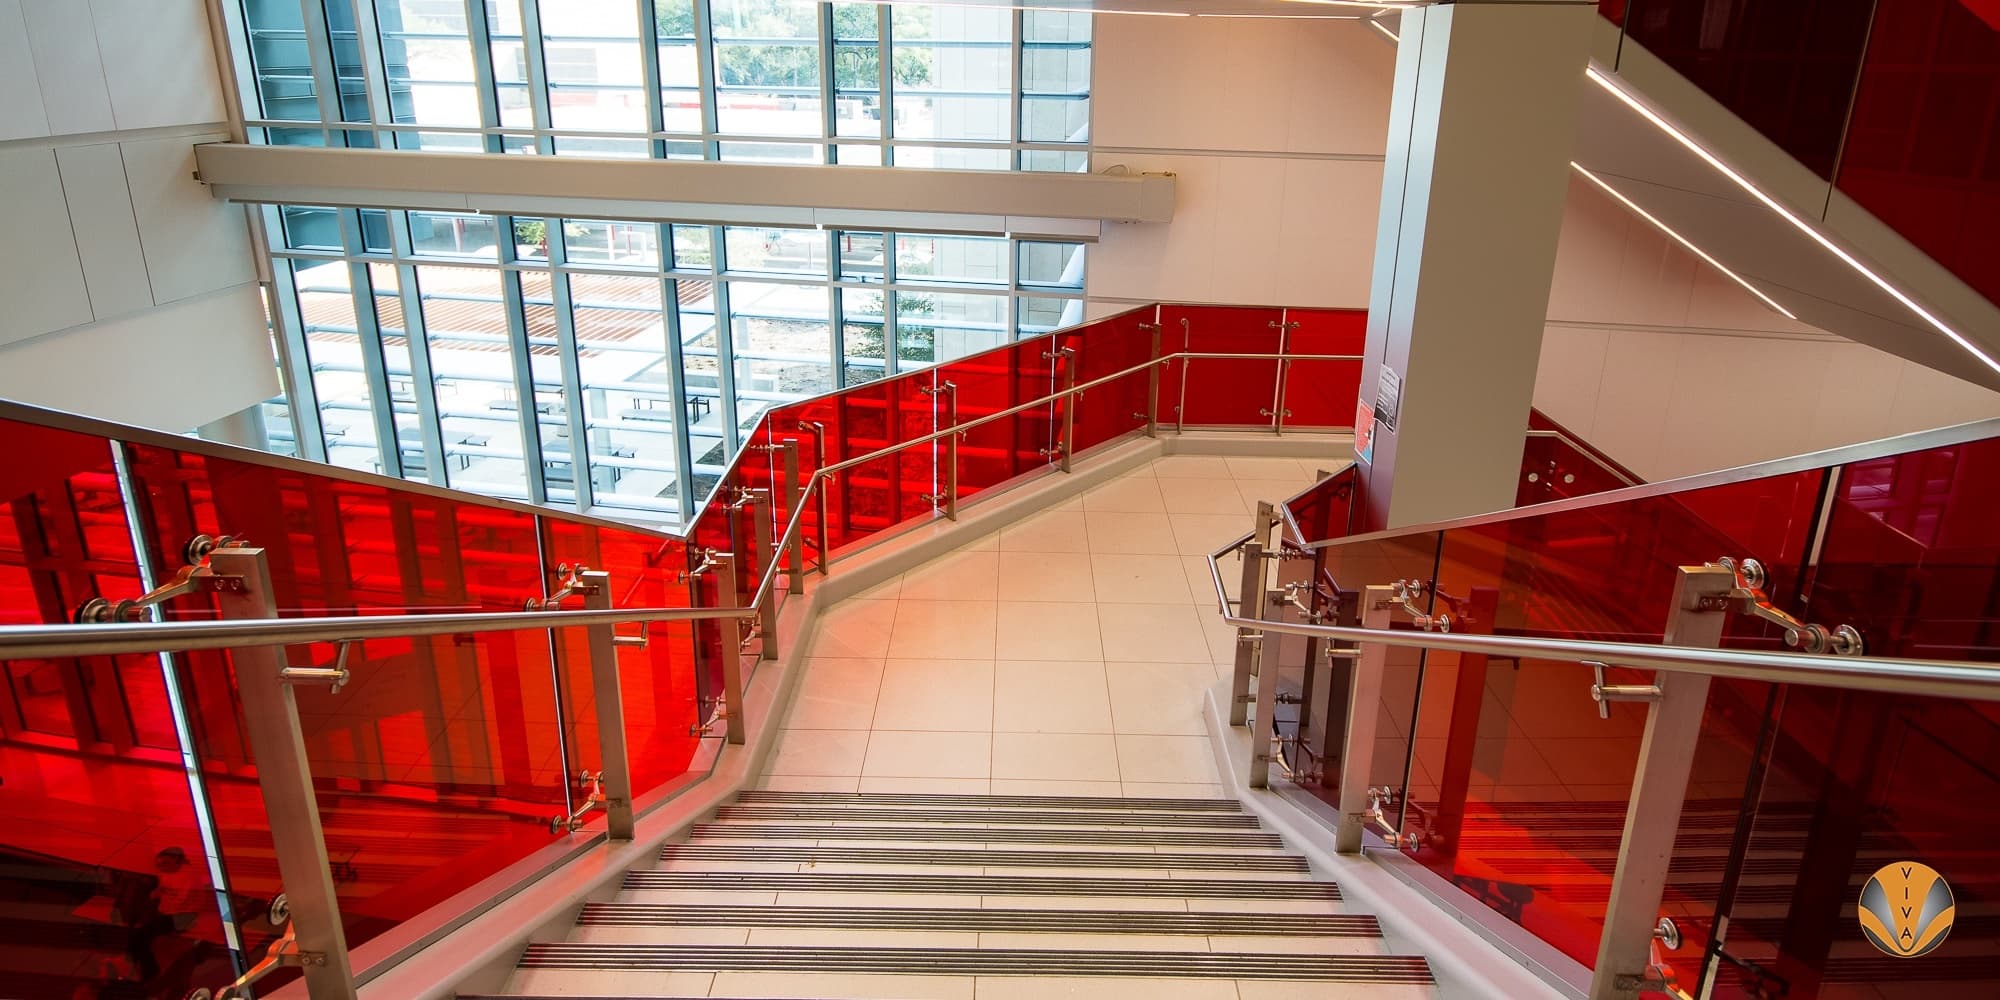 Monumental stair with custom designed and engineered stainless steel post railing system at SB-ISD near Houston, TX